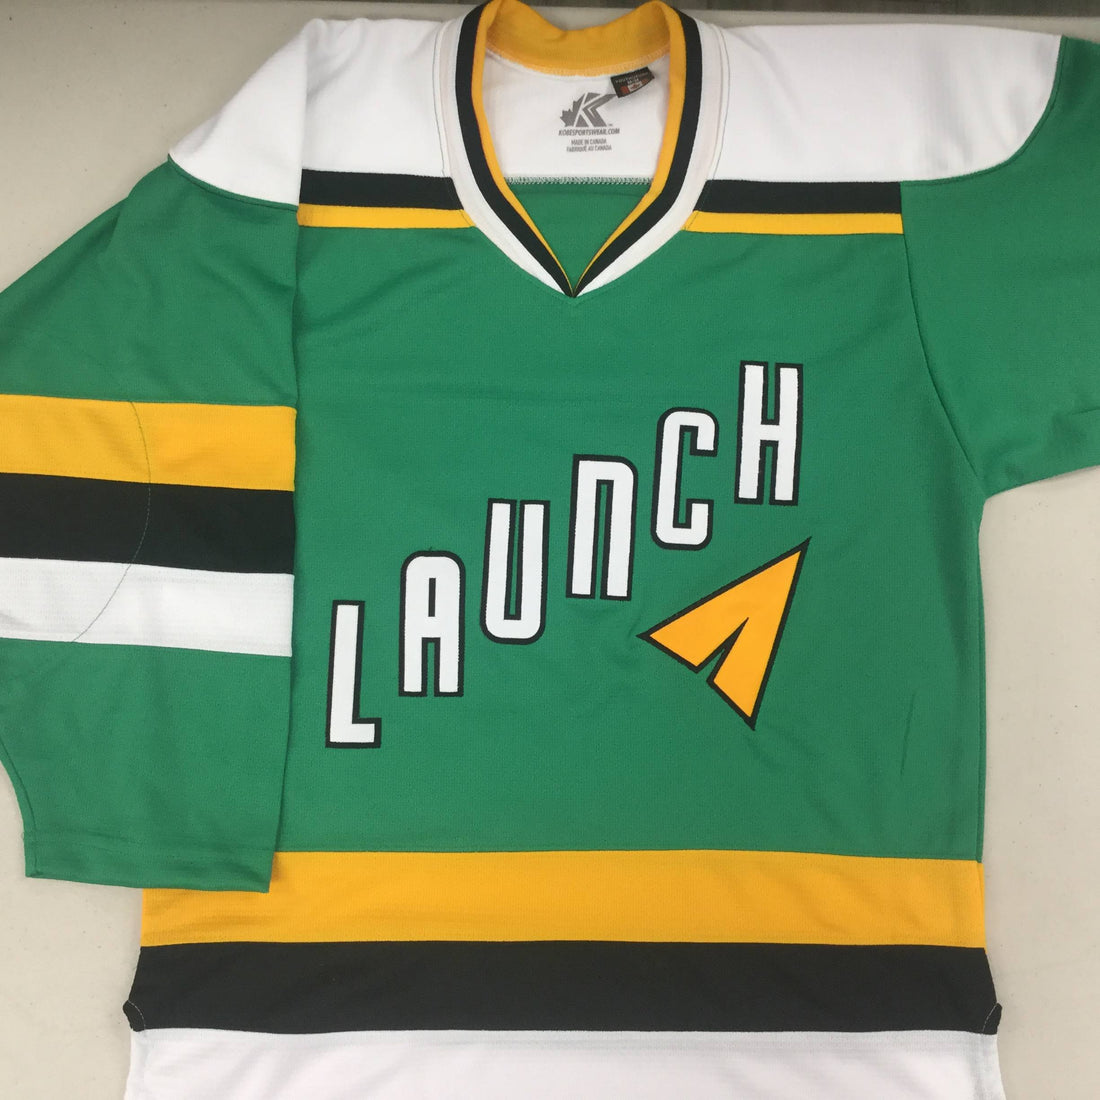 jerseys review